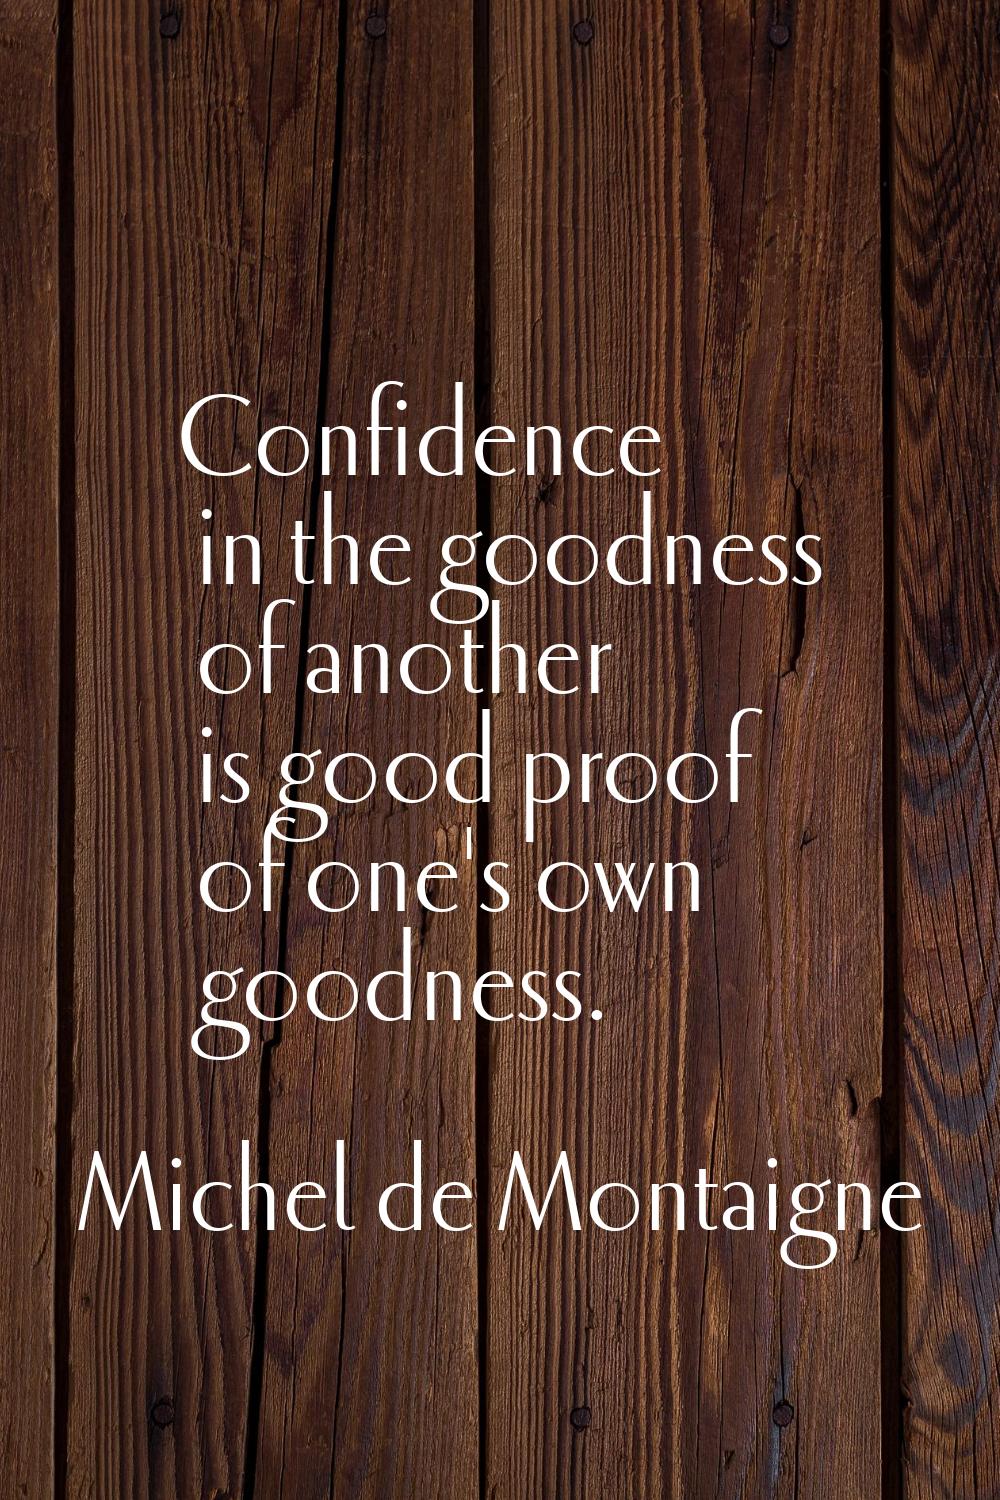 Confidence in the goodness of another is good proof of one's own goodness.